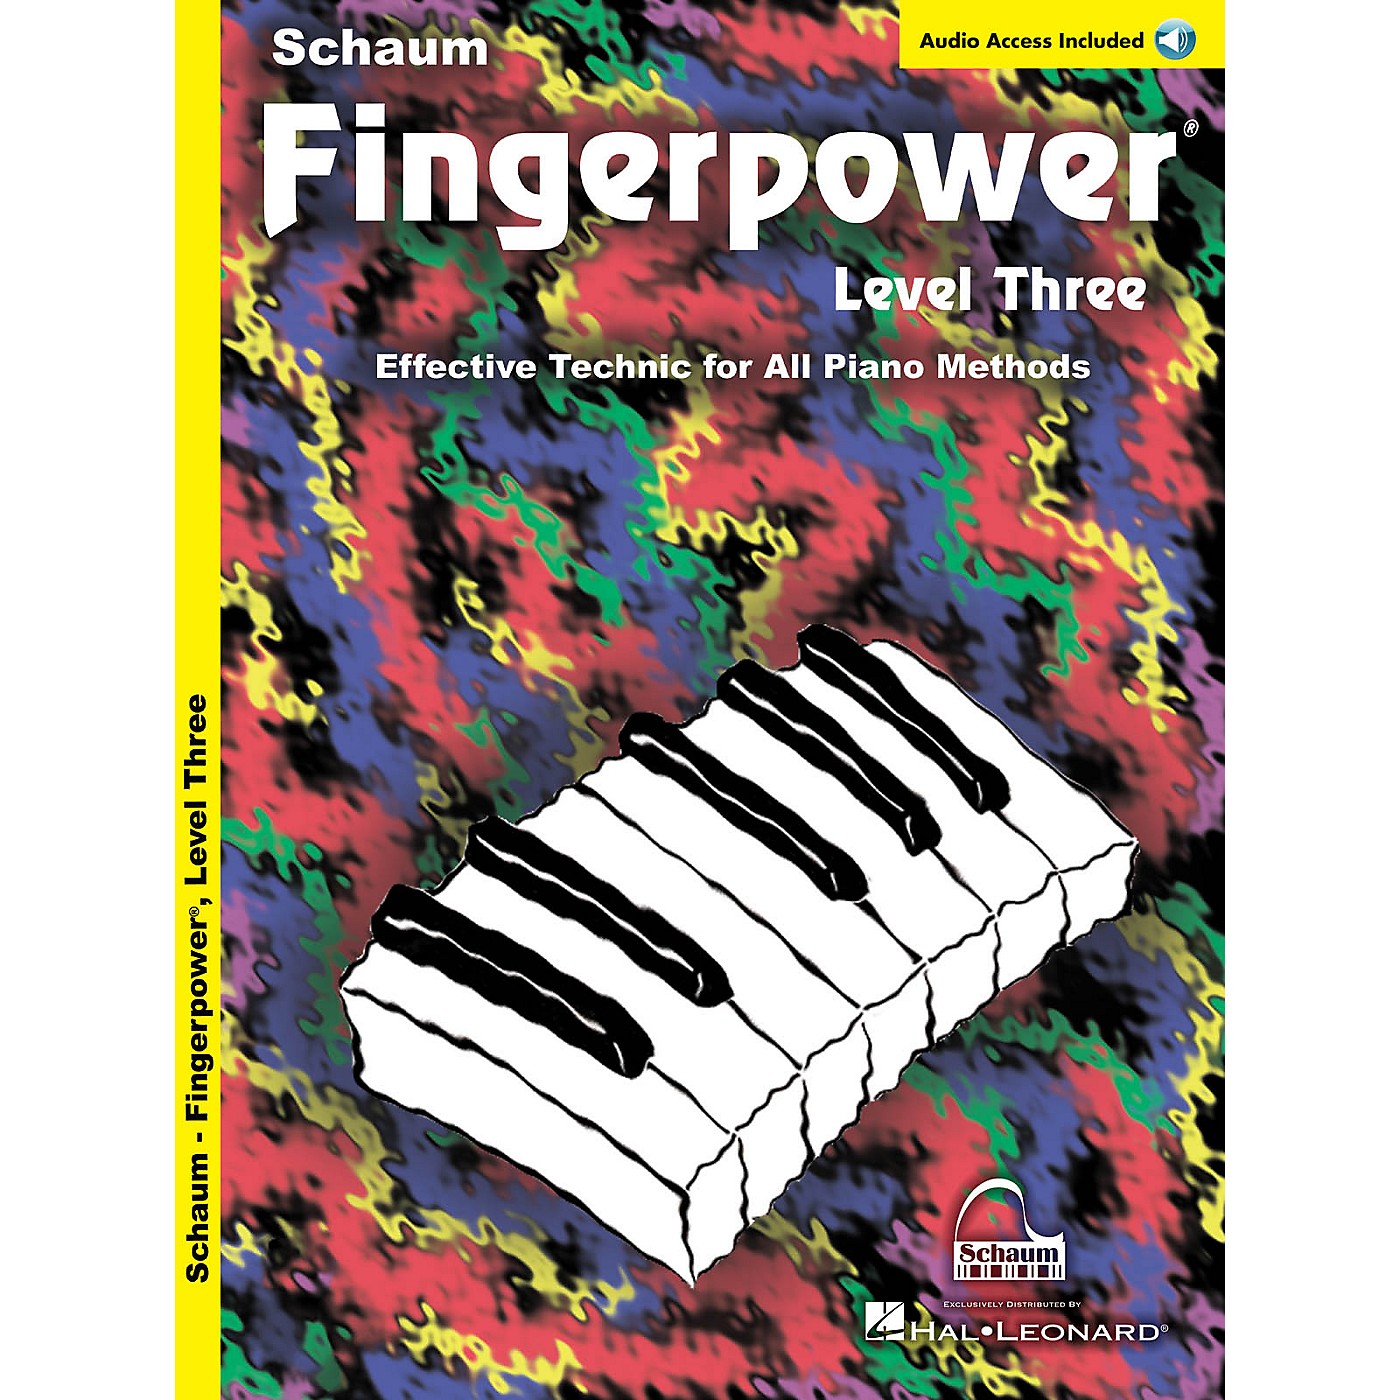 Schaum Fingerpower (Level 3 Book/CD Pack) Educational Piano Series Softcover with CD Written by John W. Schaum thumbnail